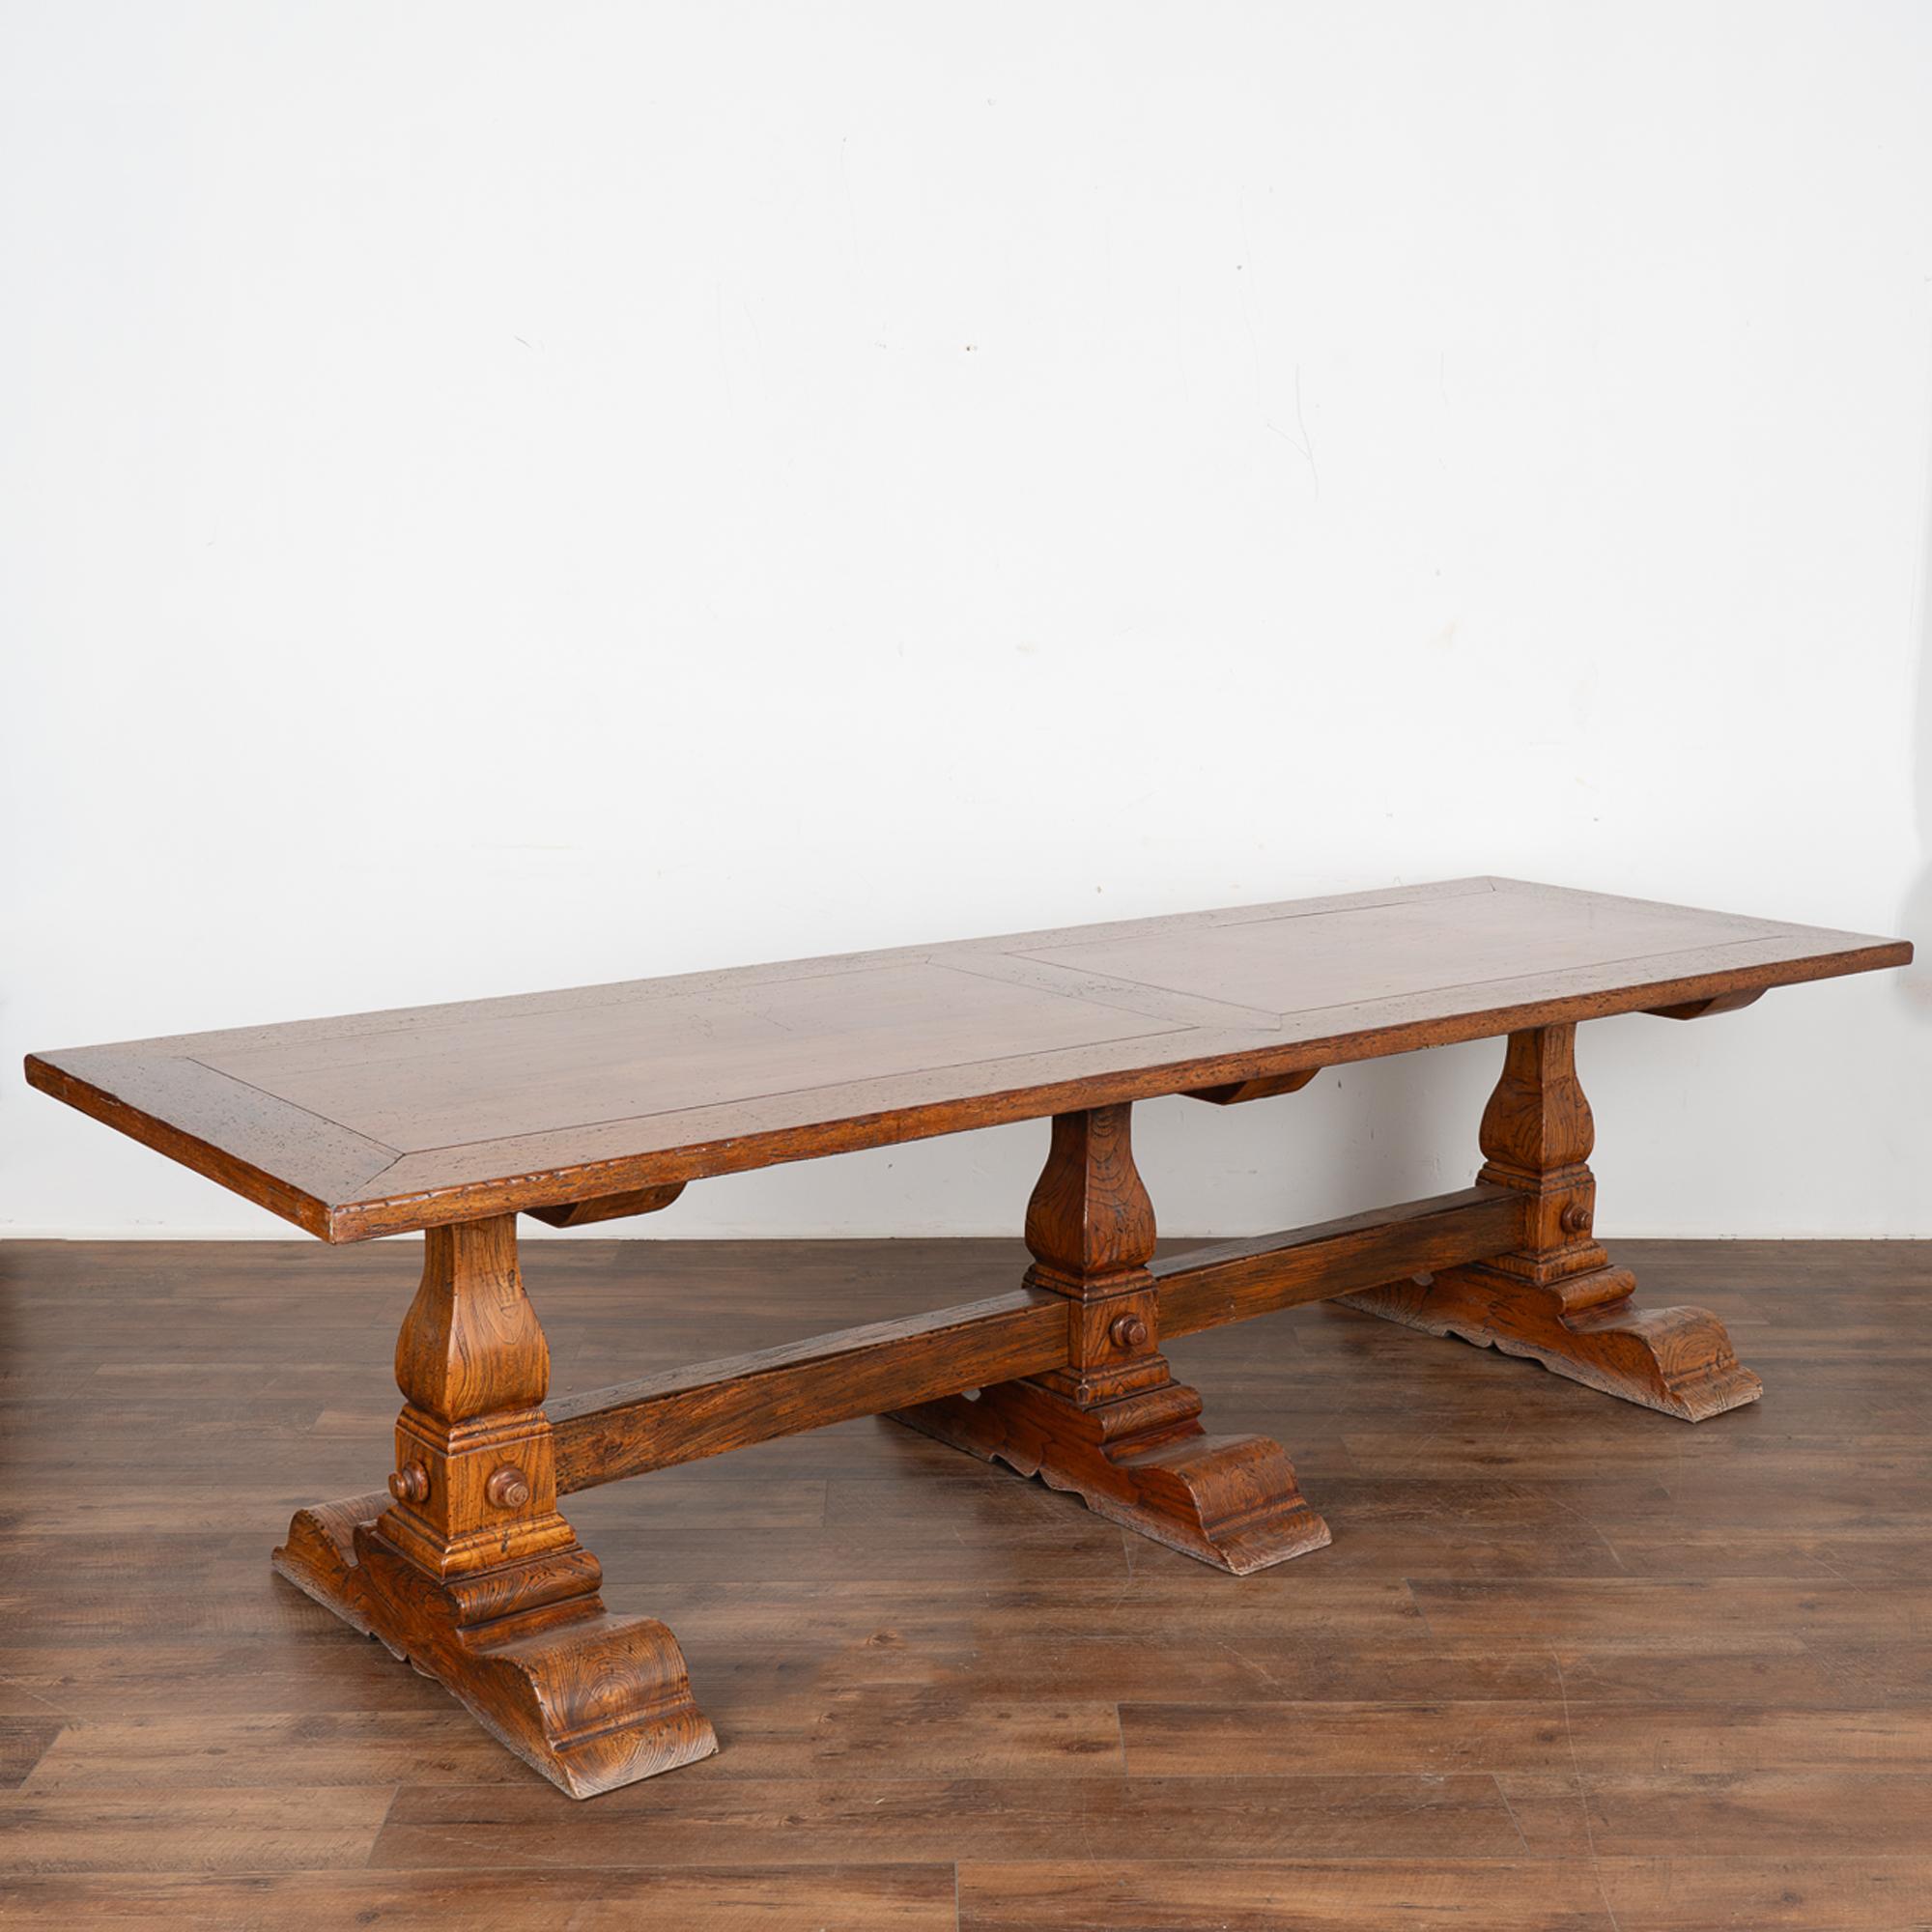 Impressive in size at just under 9' long, this library or refectory table will make a dramatic dining table and gathering place in today's modern home.
The large oak table reveals years of use as seen by typical scratches, nicks, separation of wood